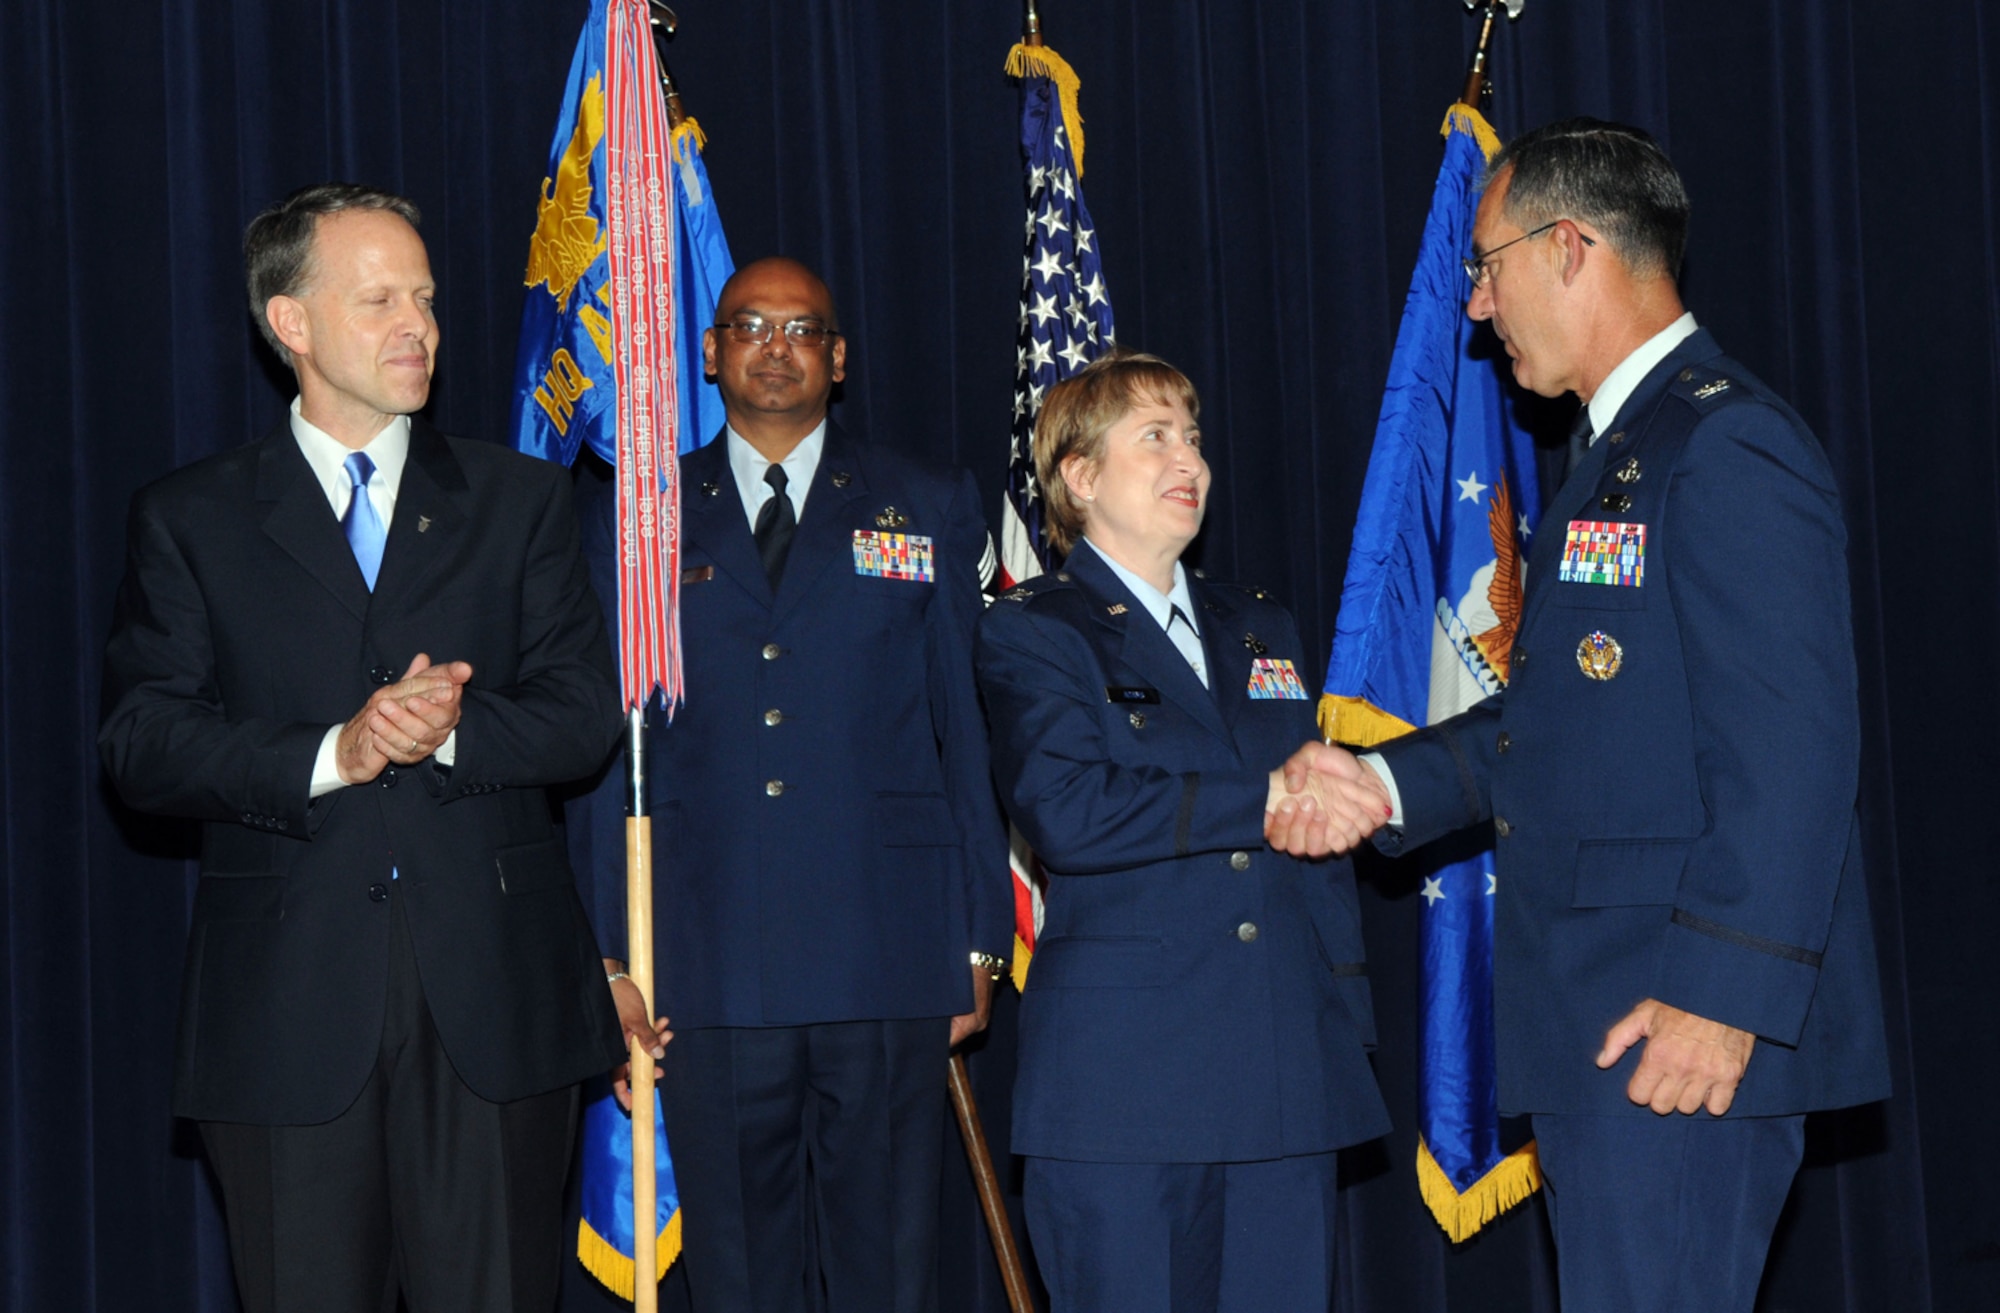 Col. Frederic Ryder (right) congratulates Col. Sandra Adams, the Air Force Services Agency's new commander, after a change-of-command ceremony May 12 at Randolph Air Force Base, Texas.  Colonel Adams succeeded Colonel Ryder who was honored in a retirement ceremony earlier that day.  The change of command, which featured performances by Tops in Blue vocalists, included remarks by Charles Milam (left), Air Force Services director. (U.S. Air Force photo/Joel Martinez) 